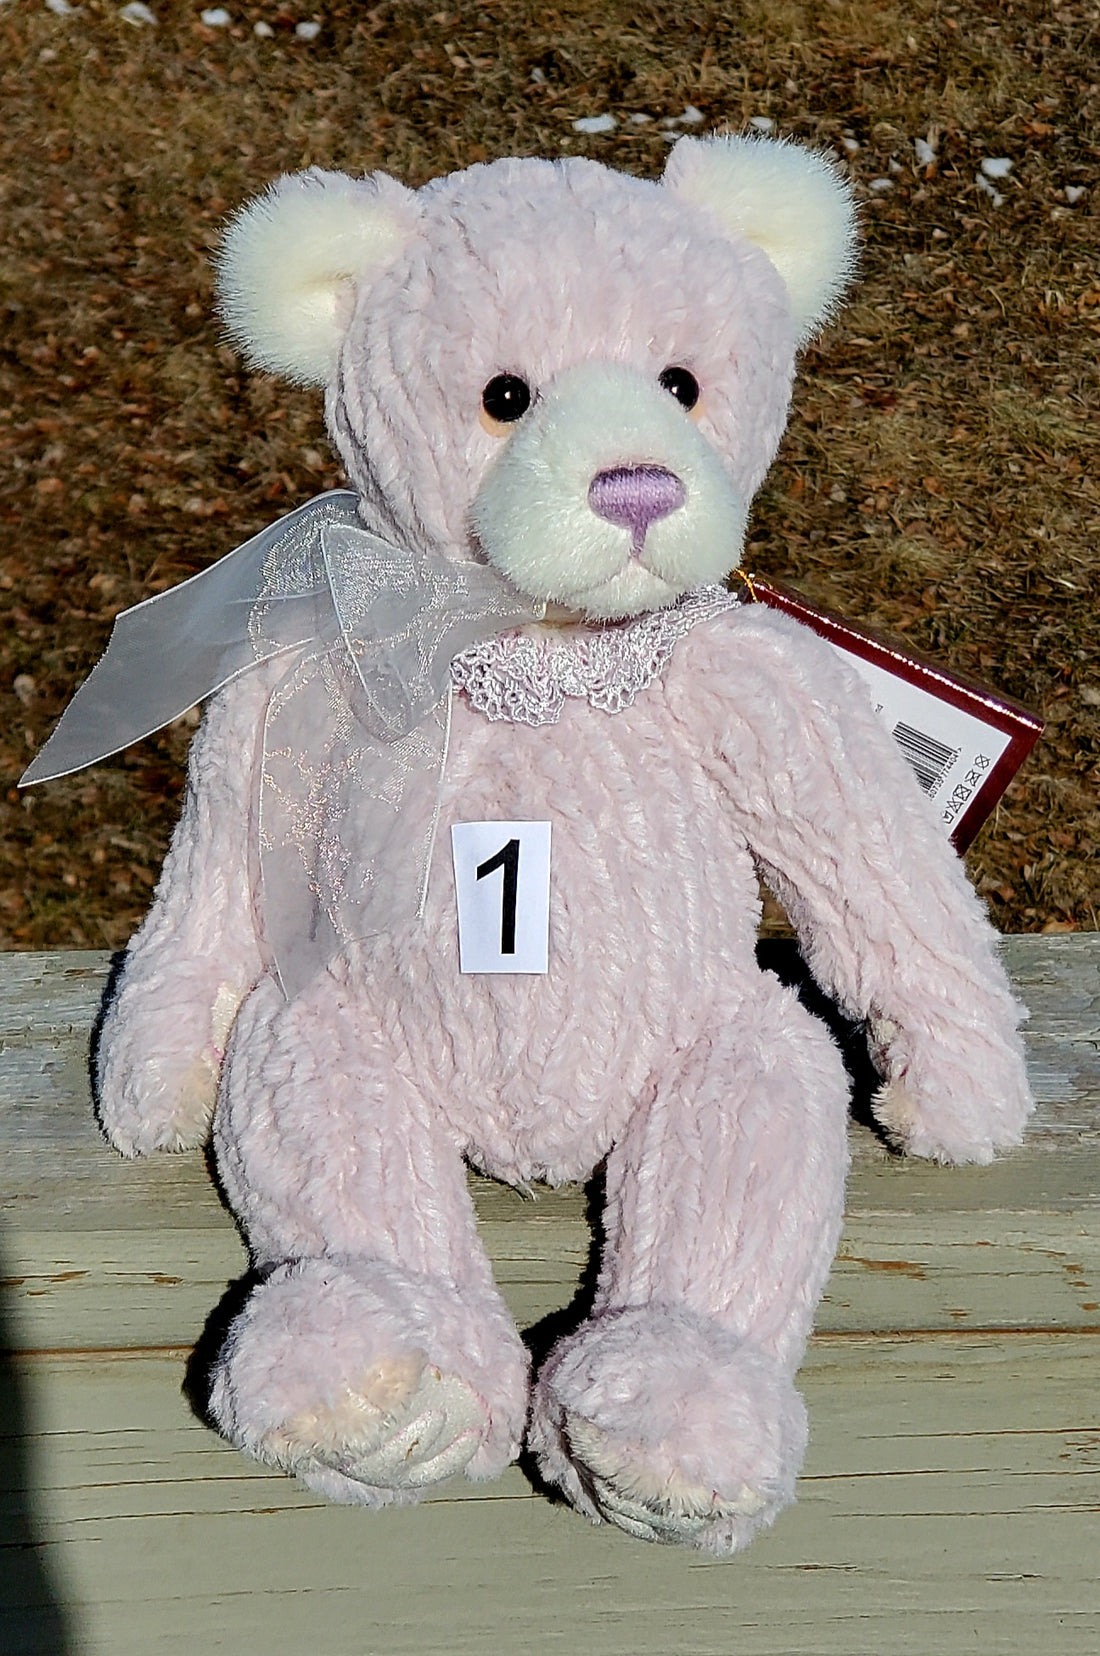 Coorie - 12" Chenille Bear by Charlie Bears